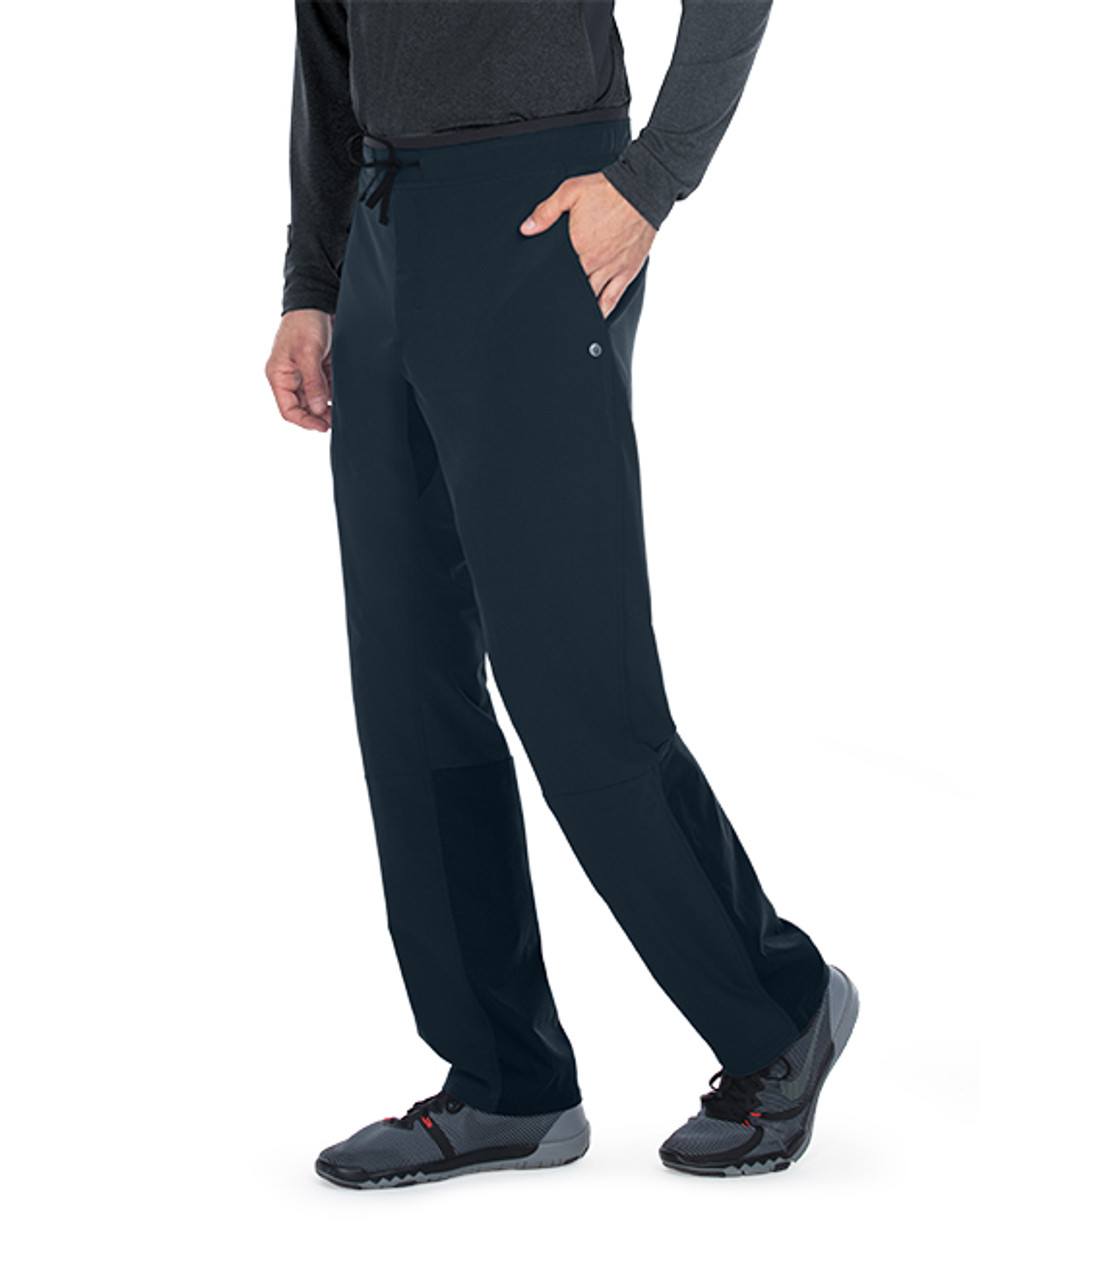 (BWP508) Barco One Wellness Men's 4 Pocket Drawcord Welt Cargo Pant